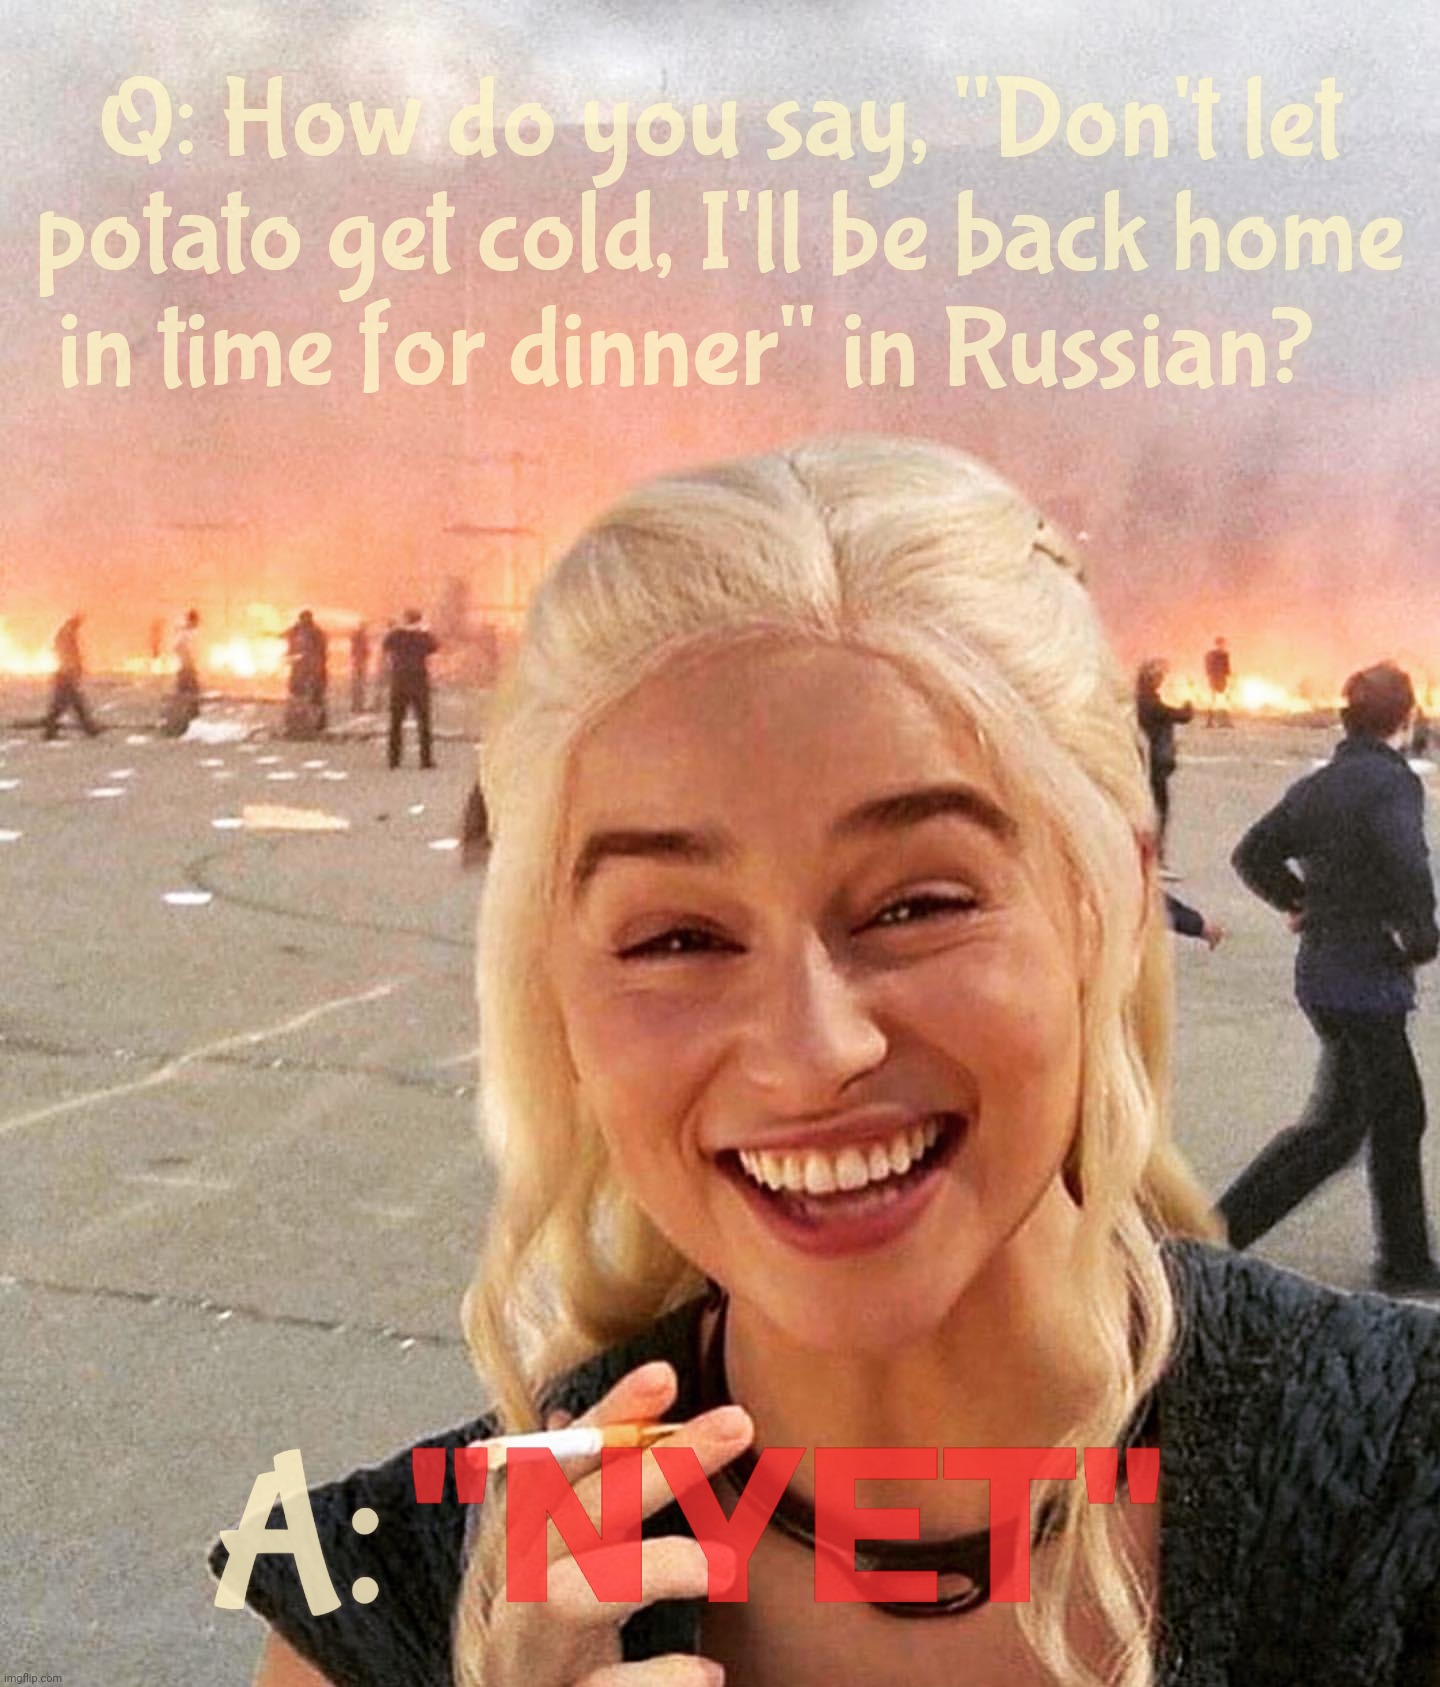 Dumbass Poostain's army only brought a lunch | Q: How do you say, "Don't let potato get cold, I'll be back home
in time for dinner" in Russian? A:; "NYET" | image tagged in disaster smoker girl,russo-ukrainian war,poow widdle poostain,is potato,say ukranazi again you commie windbag,putin zhe grate | made w/ Imgflip meme maker